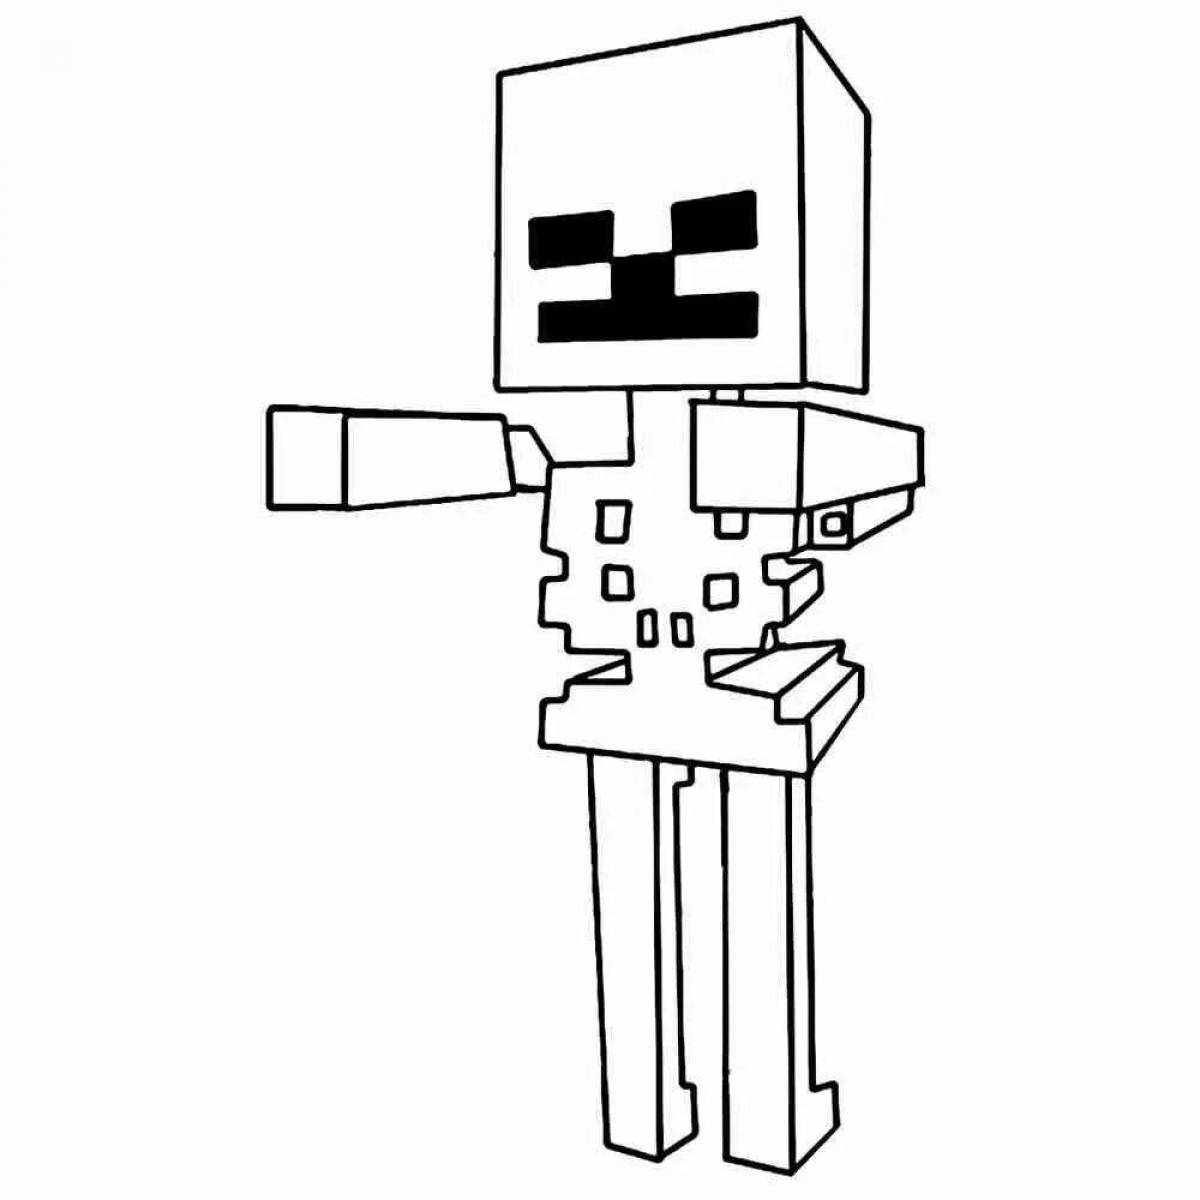 Fascinating color minecraft character coloring pages